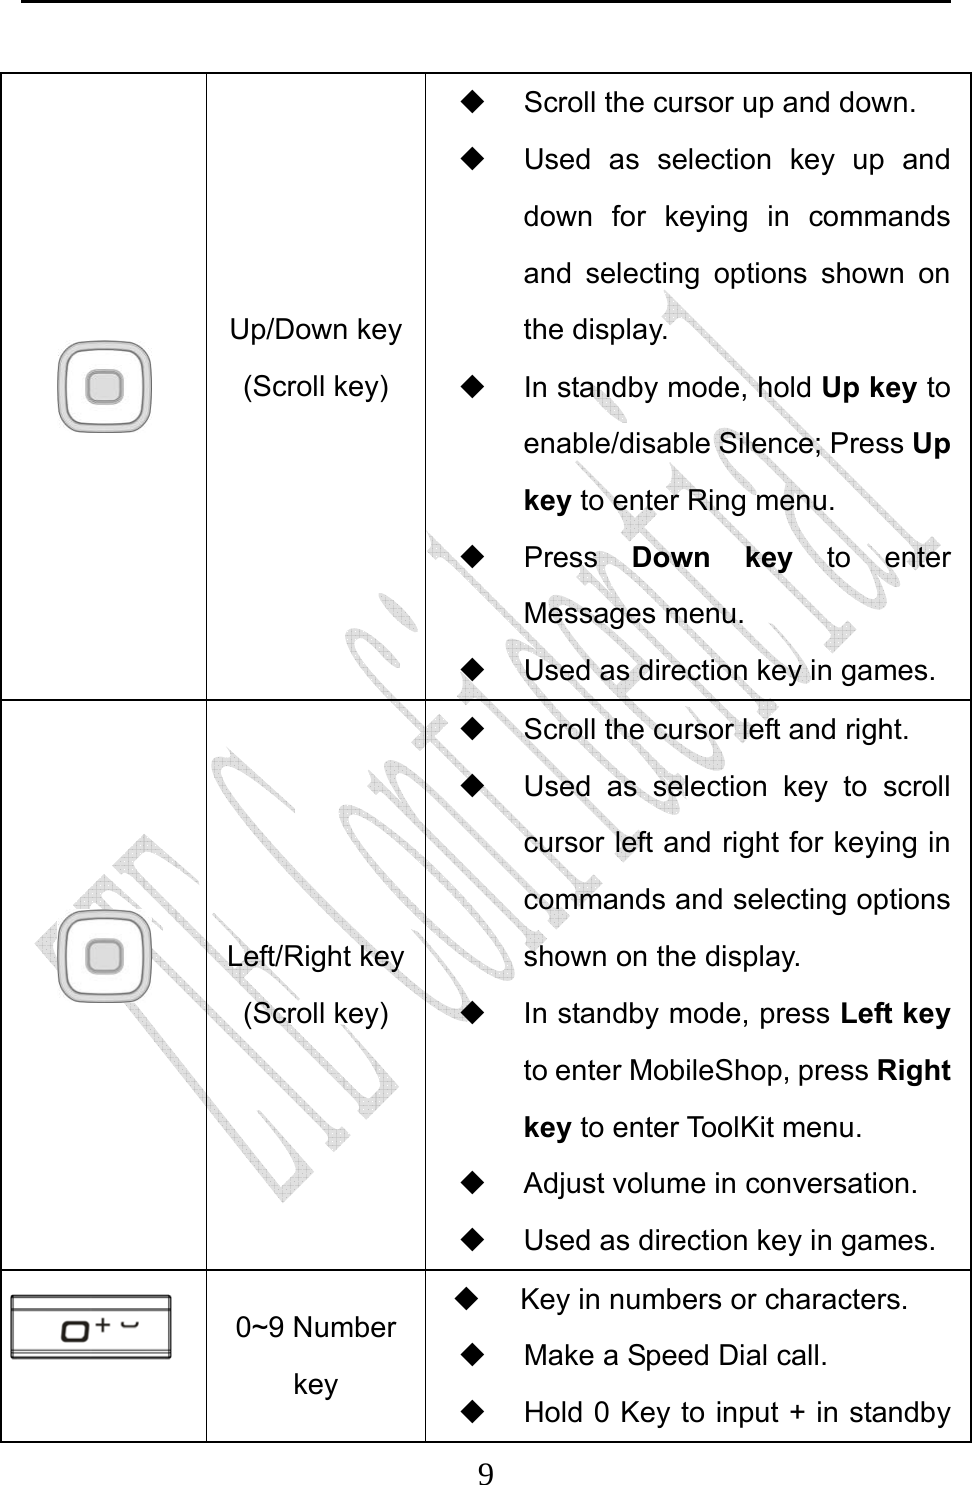                              9 Up/Down key(Scroll key)    Scroll the cursor up and down.   Used as selection key up and down for keying in commands and selecting options shown on the display.   In standby mode, hold Up key to enable/disable Silence; Press Up key to enter Ring menu.    Press Down key to enter Messages menu.     Used as direction key in games.   Left/Right key(Scroll key)   Scroll the cursor left and right.   Used as selection key to scroll cursor left and right for keying in commands and selecting options shown on the display.   In standby mode, press Left key to enter MobileShop, press Right key to enter ToolKit menu.    Adjust volume in conversation.   Used as direction key in games.  0~9 Number key    Key in numbers or characters.   Make a Speed Dial call.   Hold 0 Key to input + in standby 